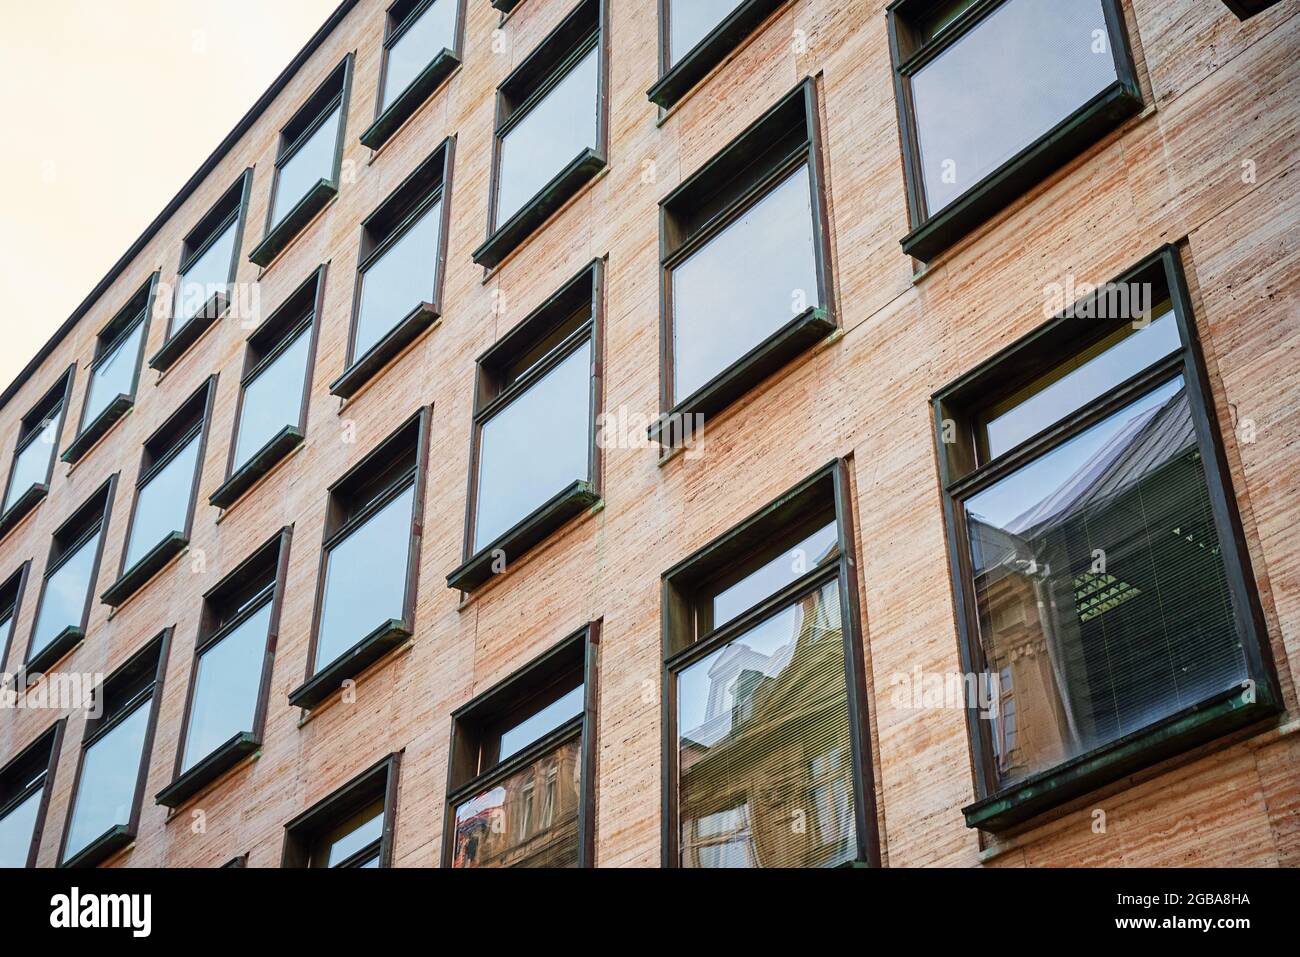 Facade of building. Windows on the residential building. Modern architecture style Stock Photo